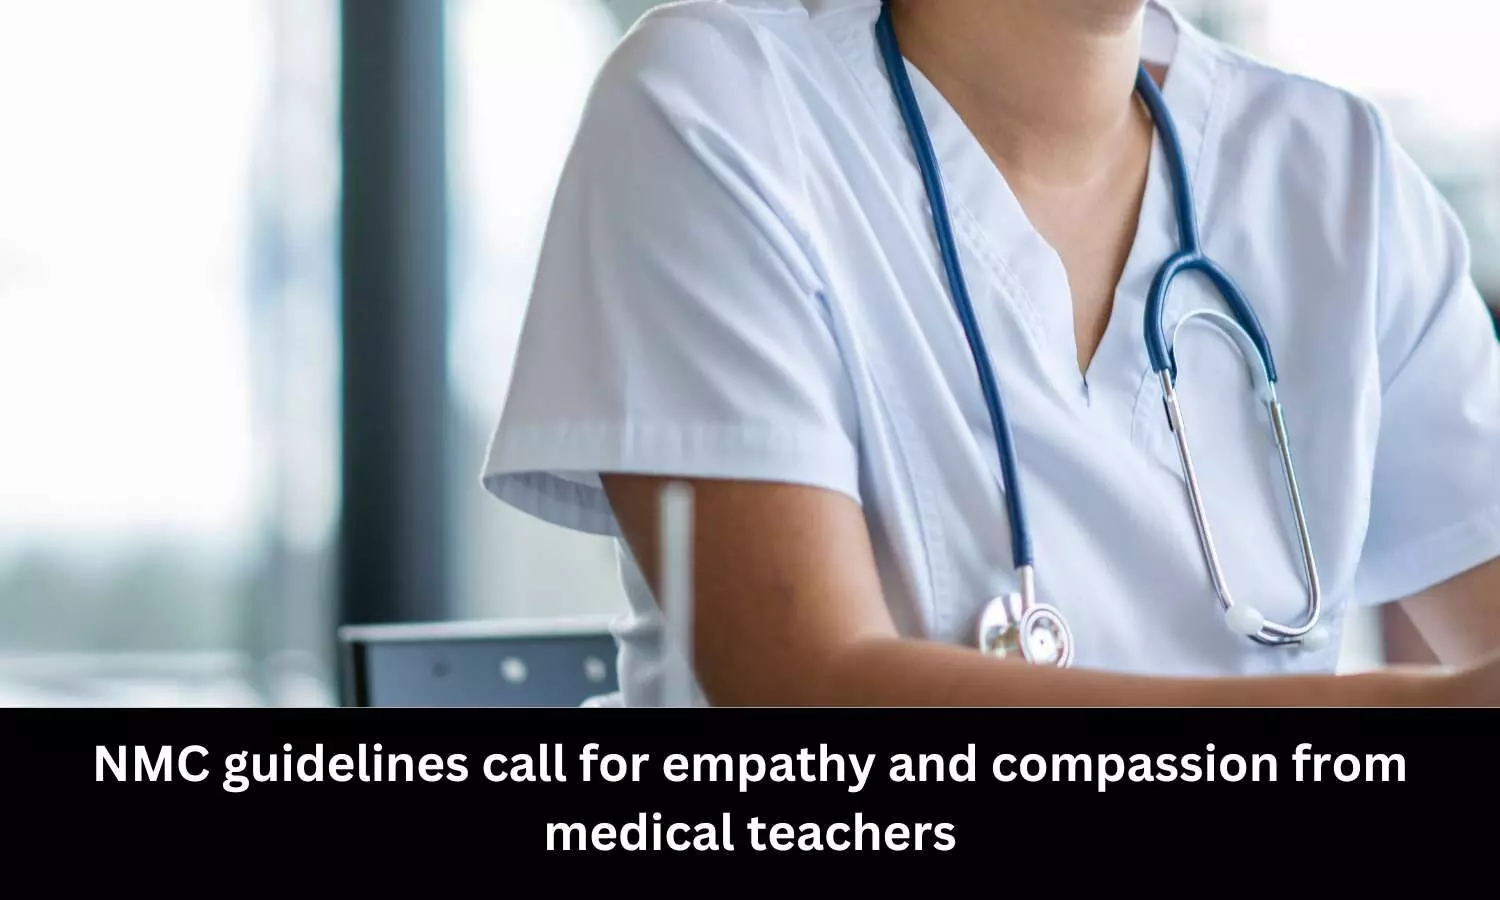 National Medical Commission guidelines call for compassion, empathy from medical teachers